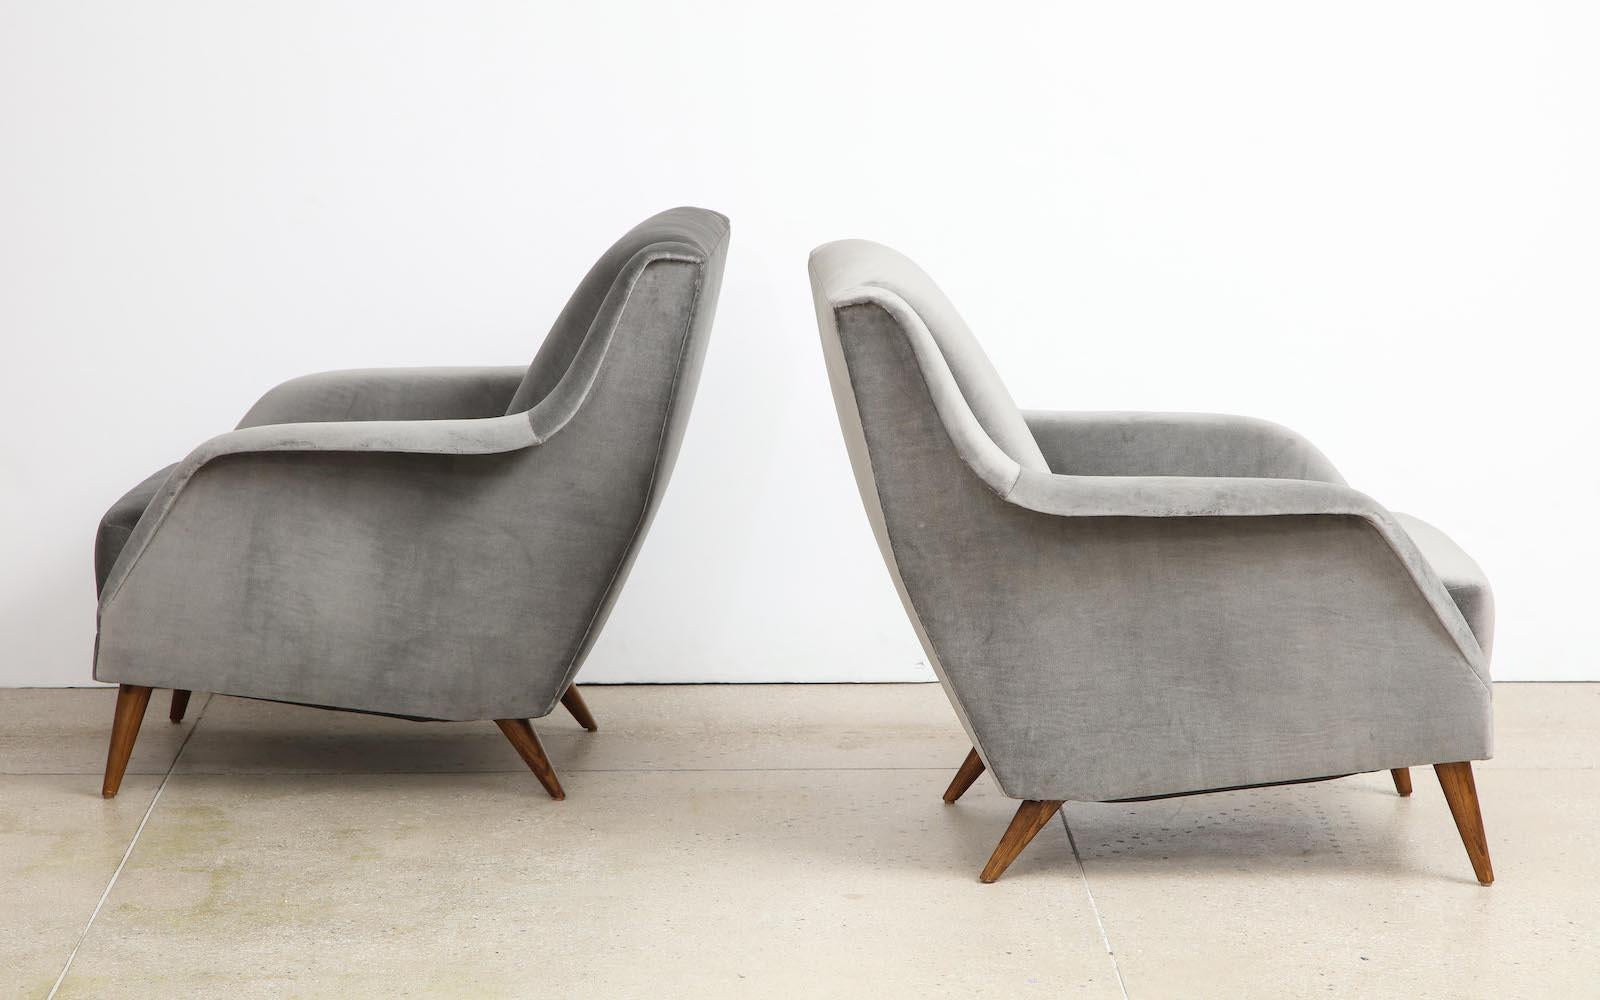 Pair of #802 lounge chairs by Carlo De Carli for Cassina. Sculptural upholstered seating with ashwood conical legs. Recently reupholstered in gray velvet.